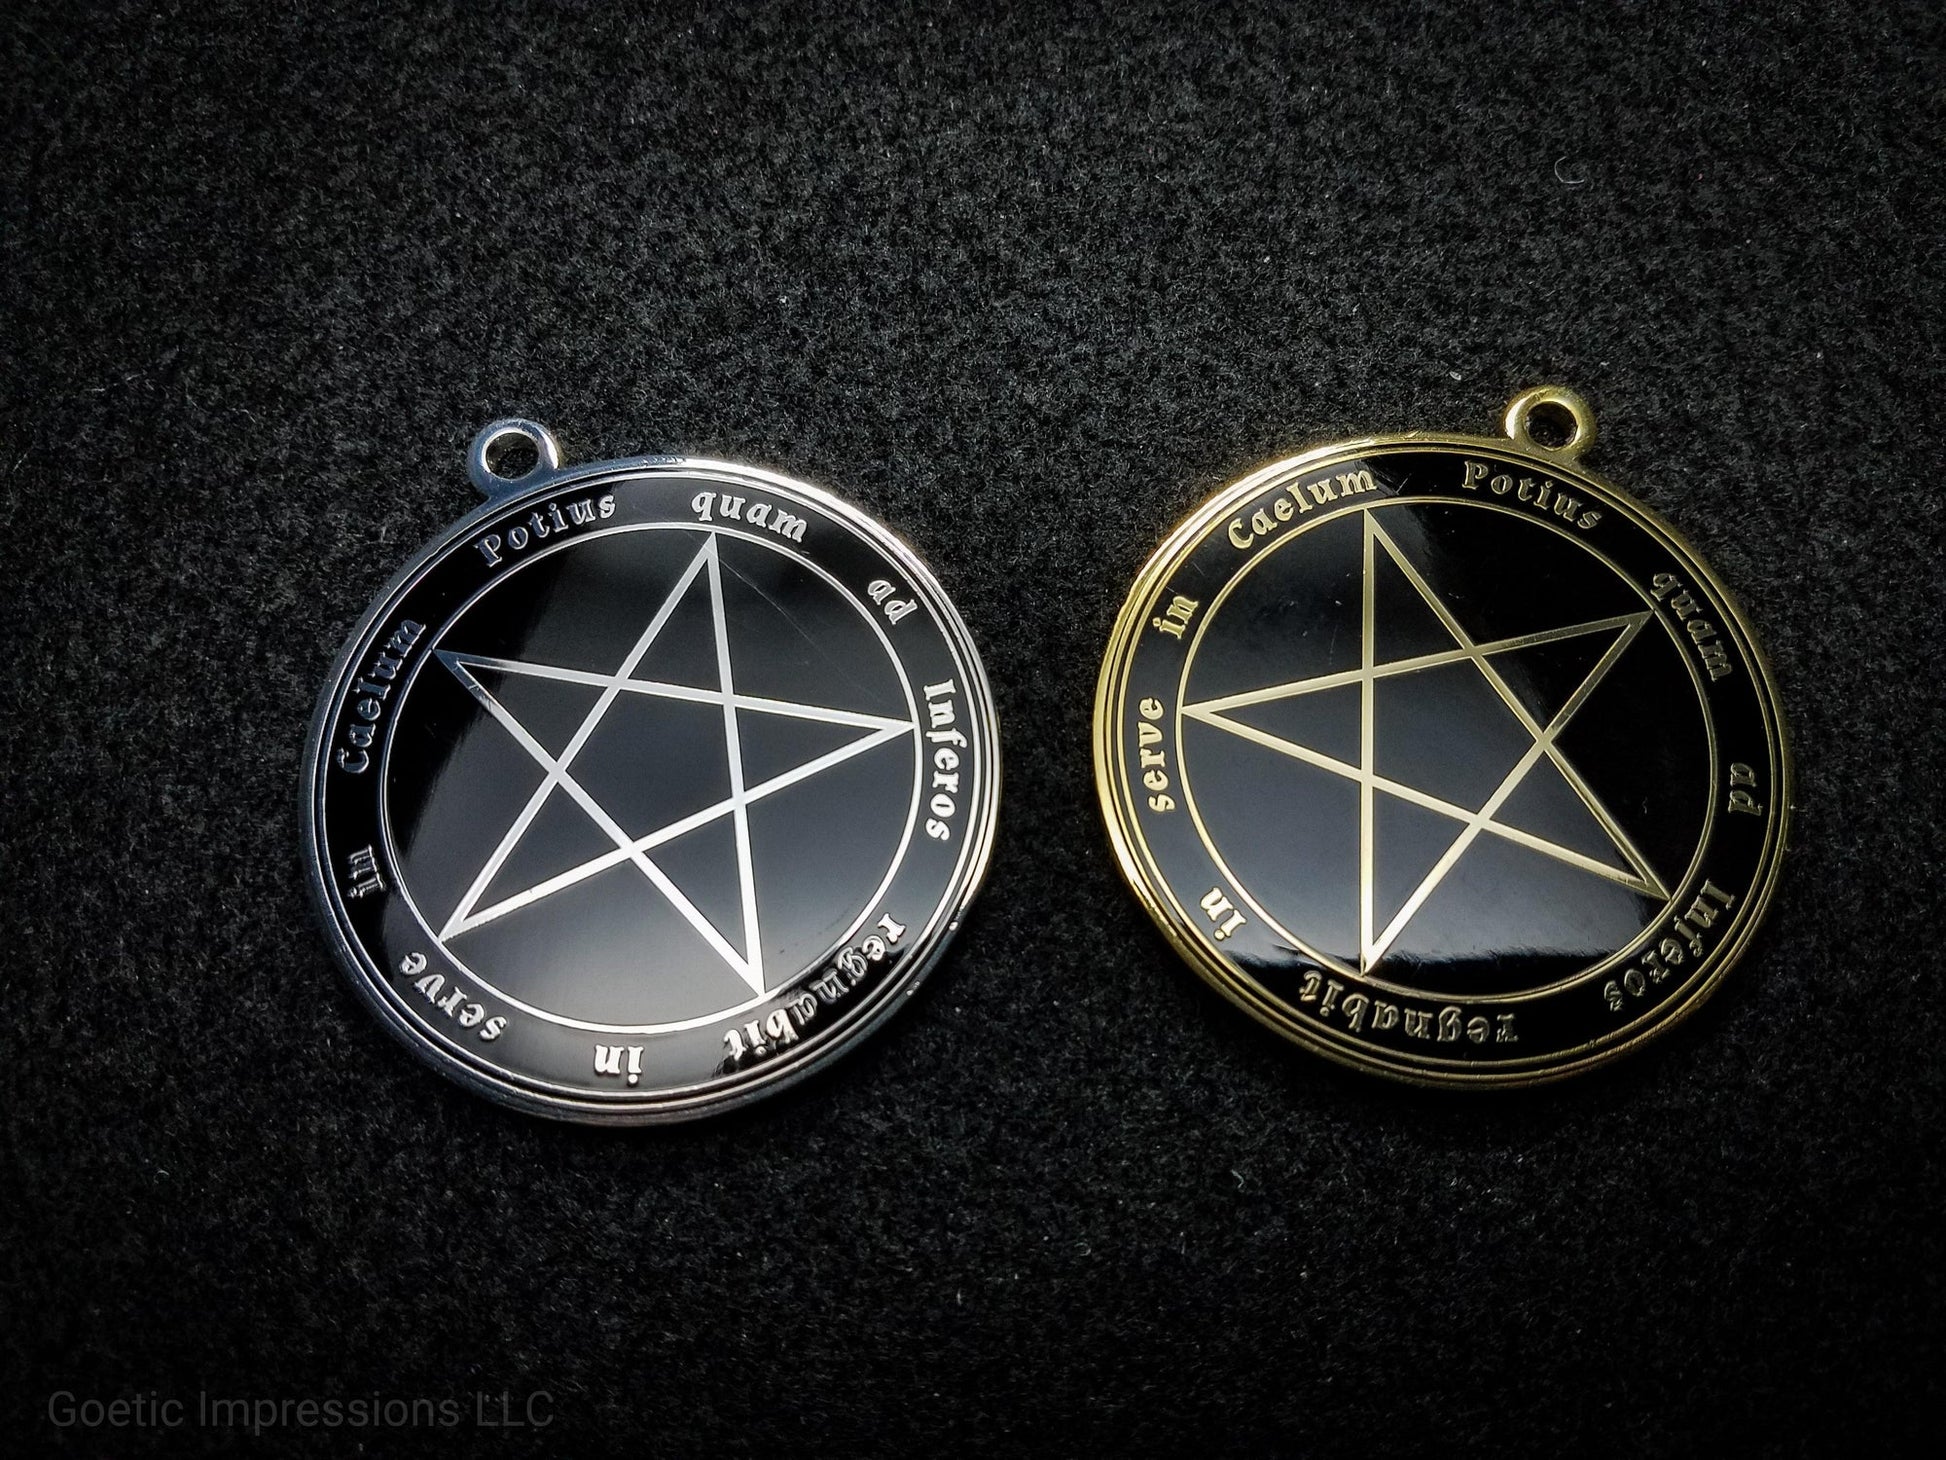 Satanic Pentagram Sigil medallion features the Latin phrase 'Potius quam ad Inferos regnabit in serve in Caelum' meaning, 'Better to rule in Hell than to serve in Heaven'.